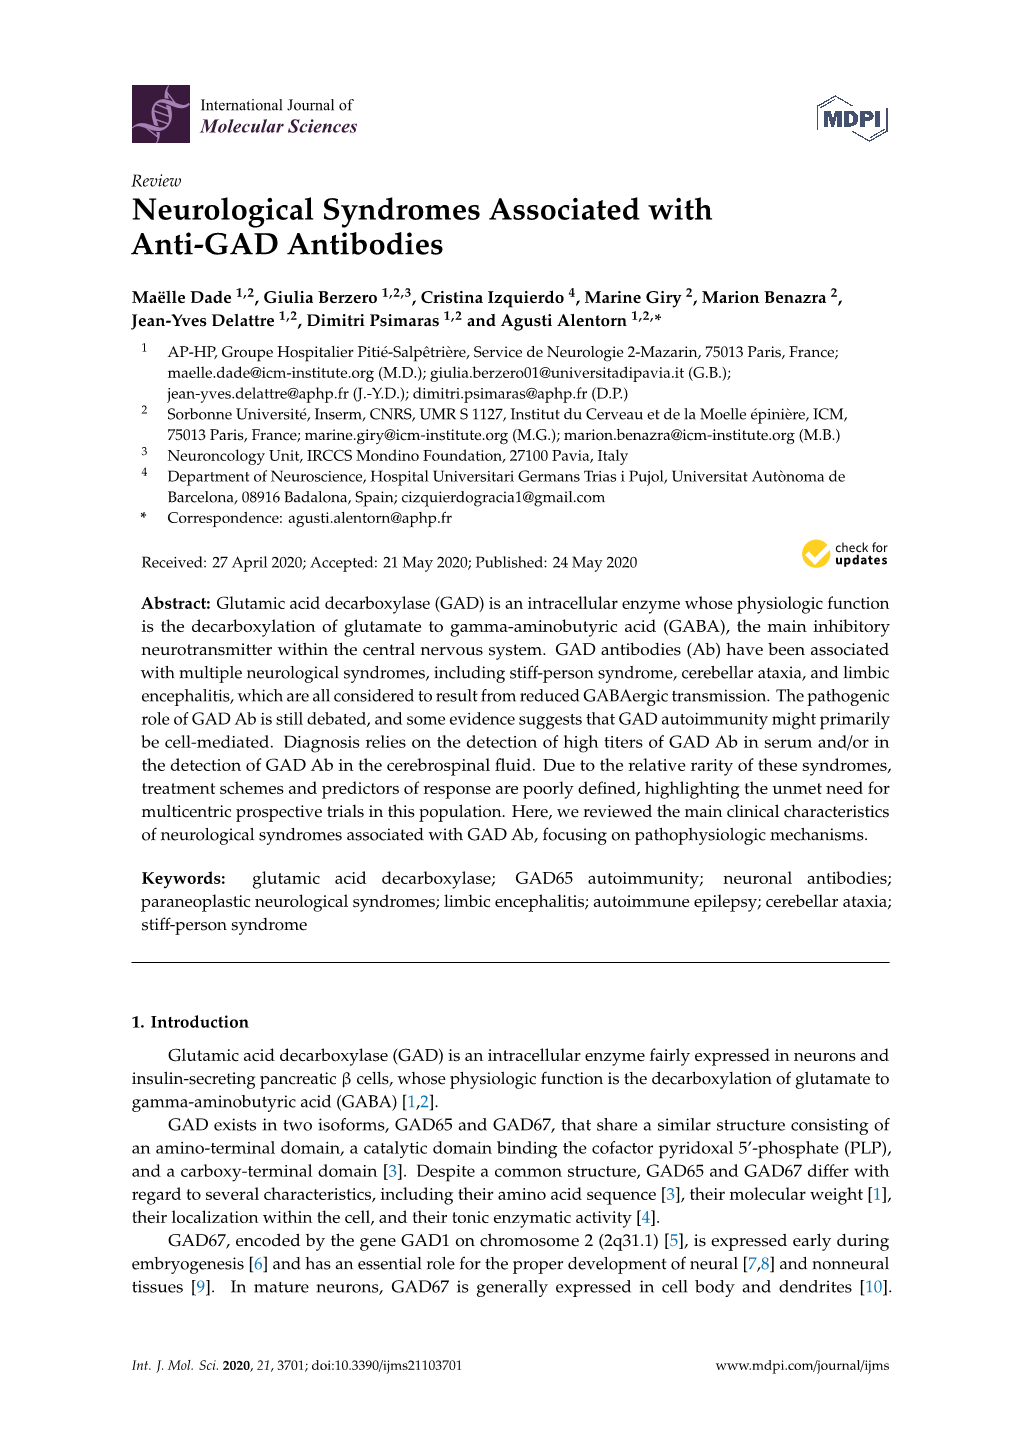 Neurological Syndromes Associated with Anti-GAD Antibodies